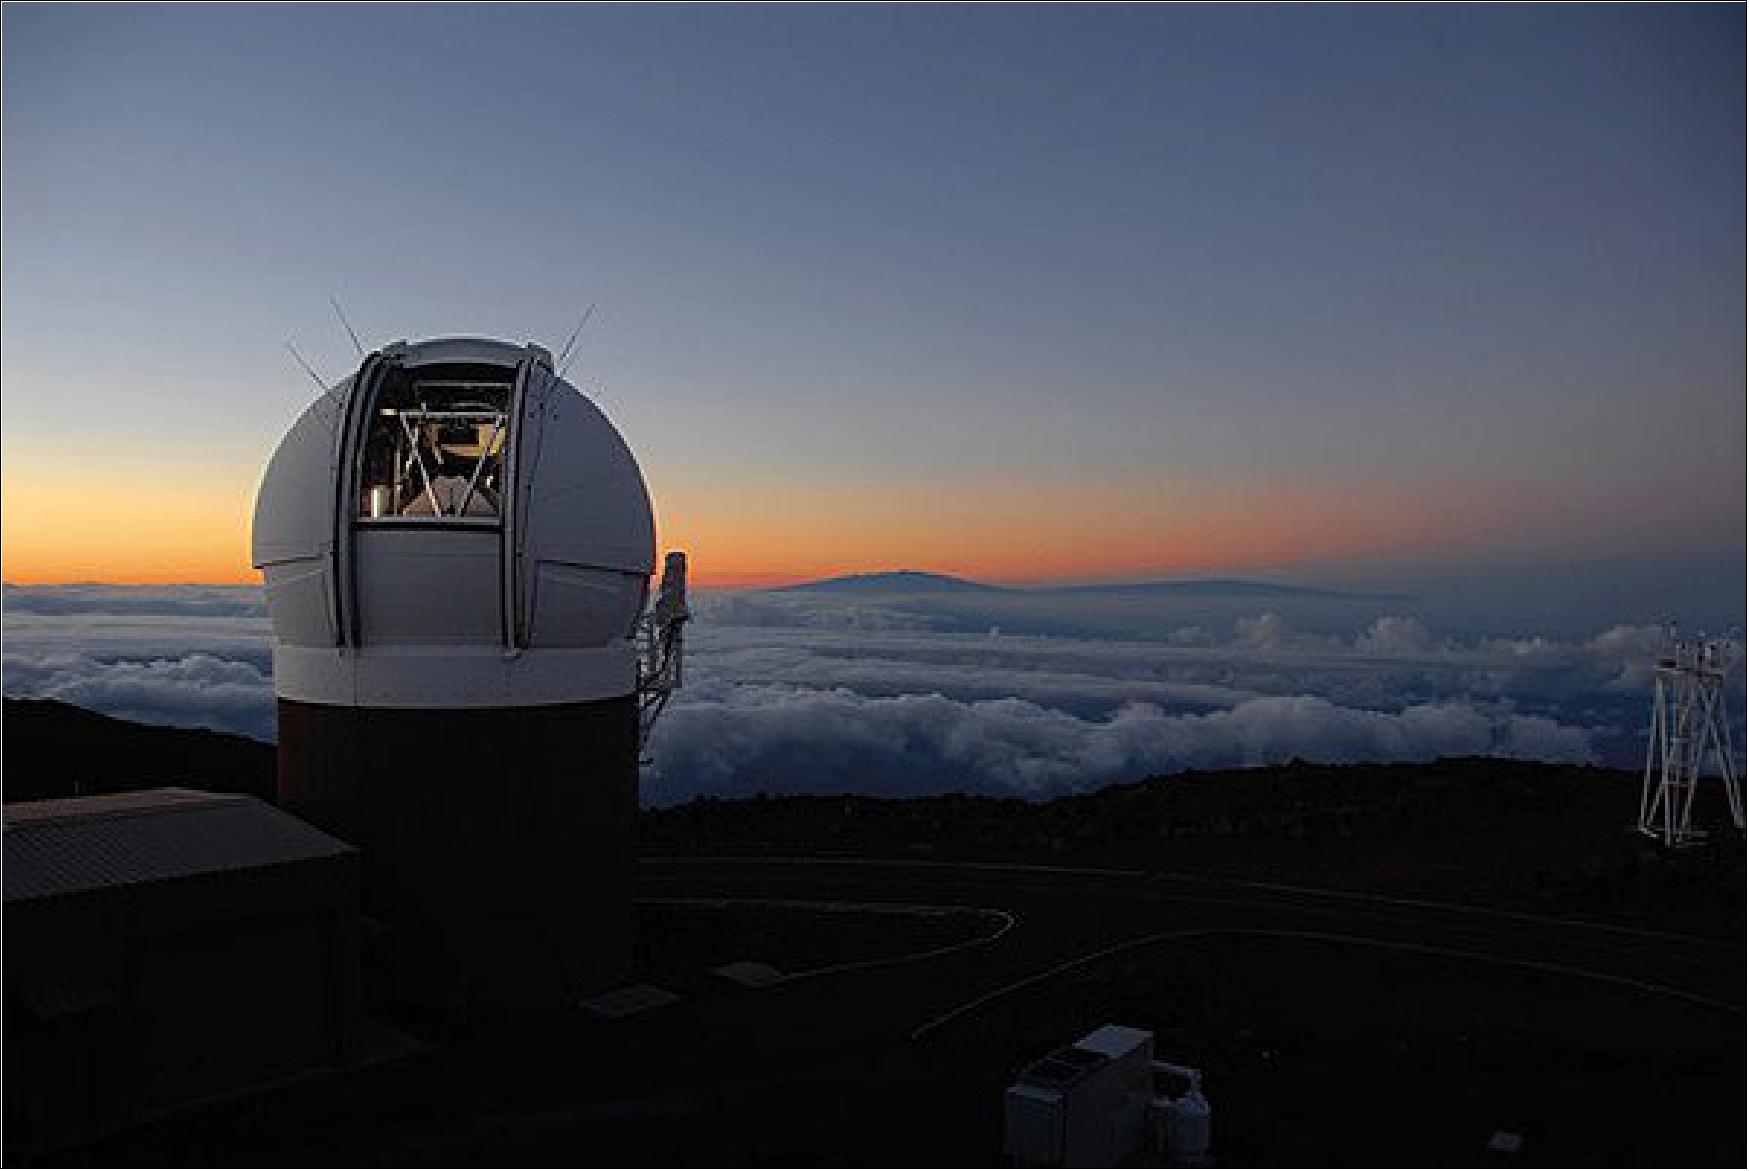 Figure 7: The Pan-STARRS Observatories watch for asteroids, supernovas and other transient objects from the island of Maui (photo credit: Rob Ratkowski/Institute for Astronomy)